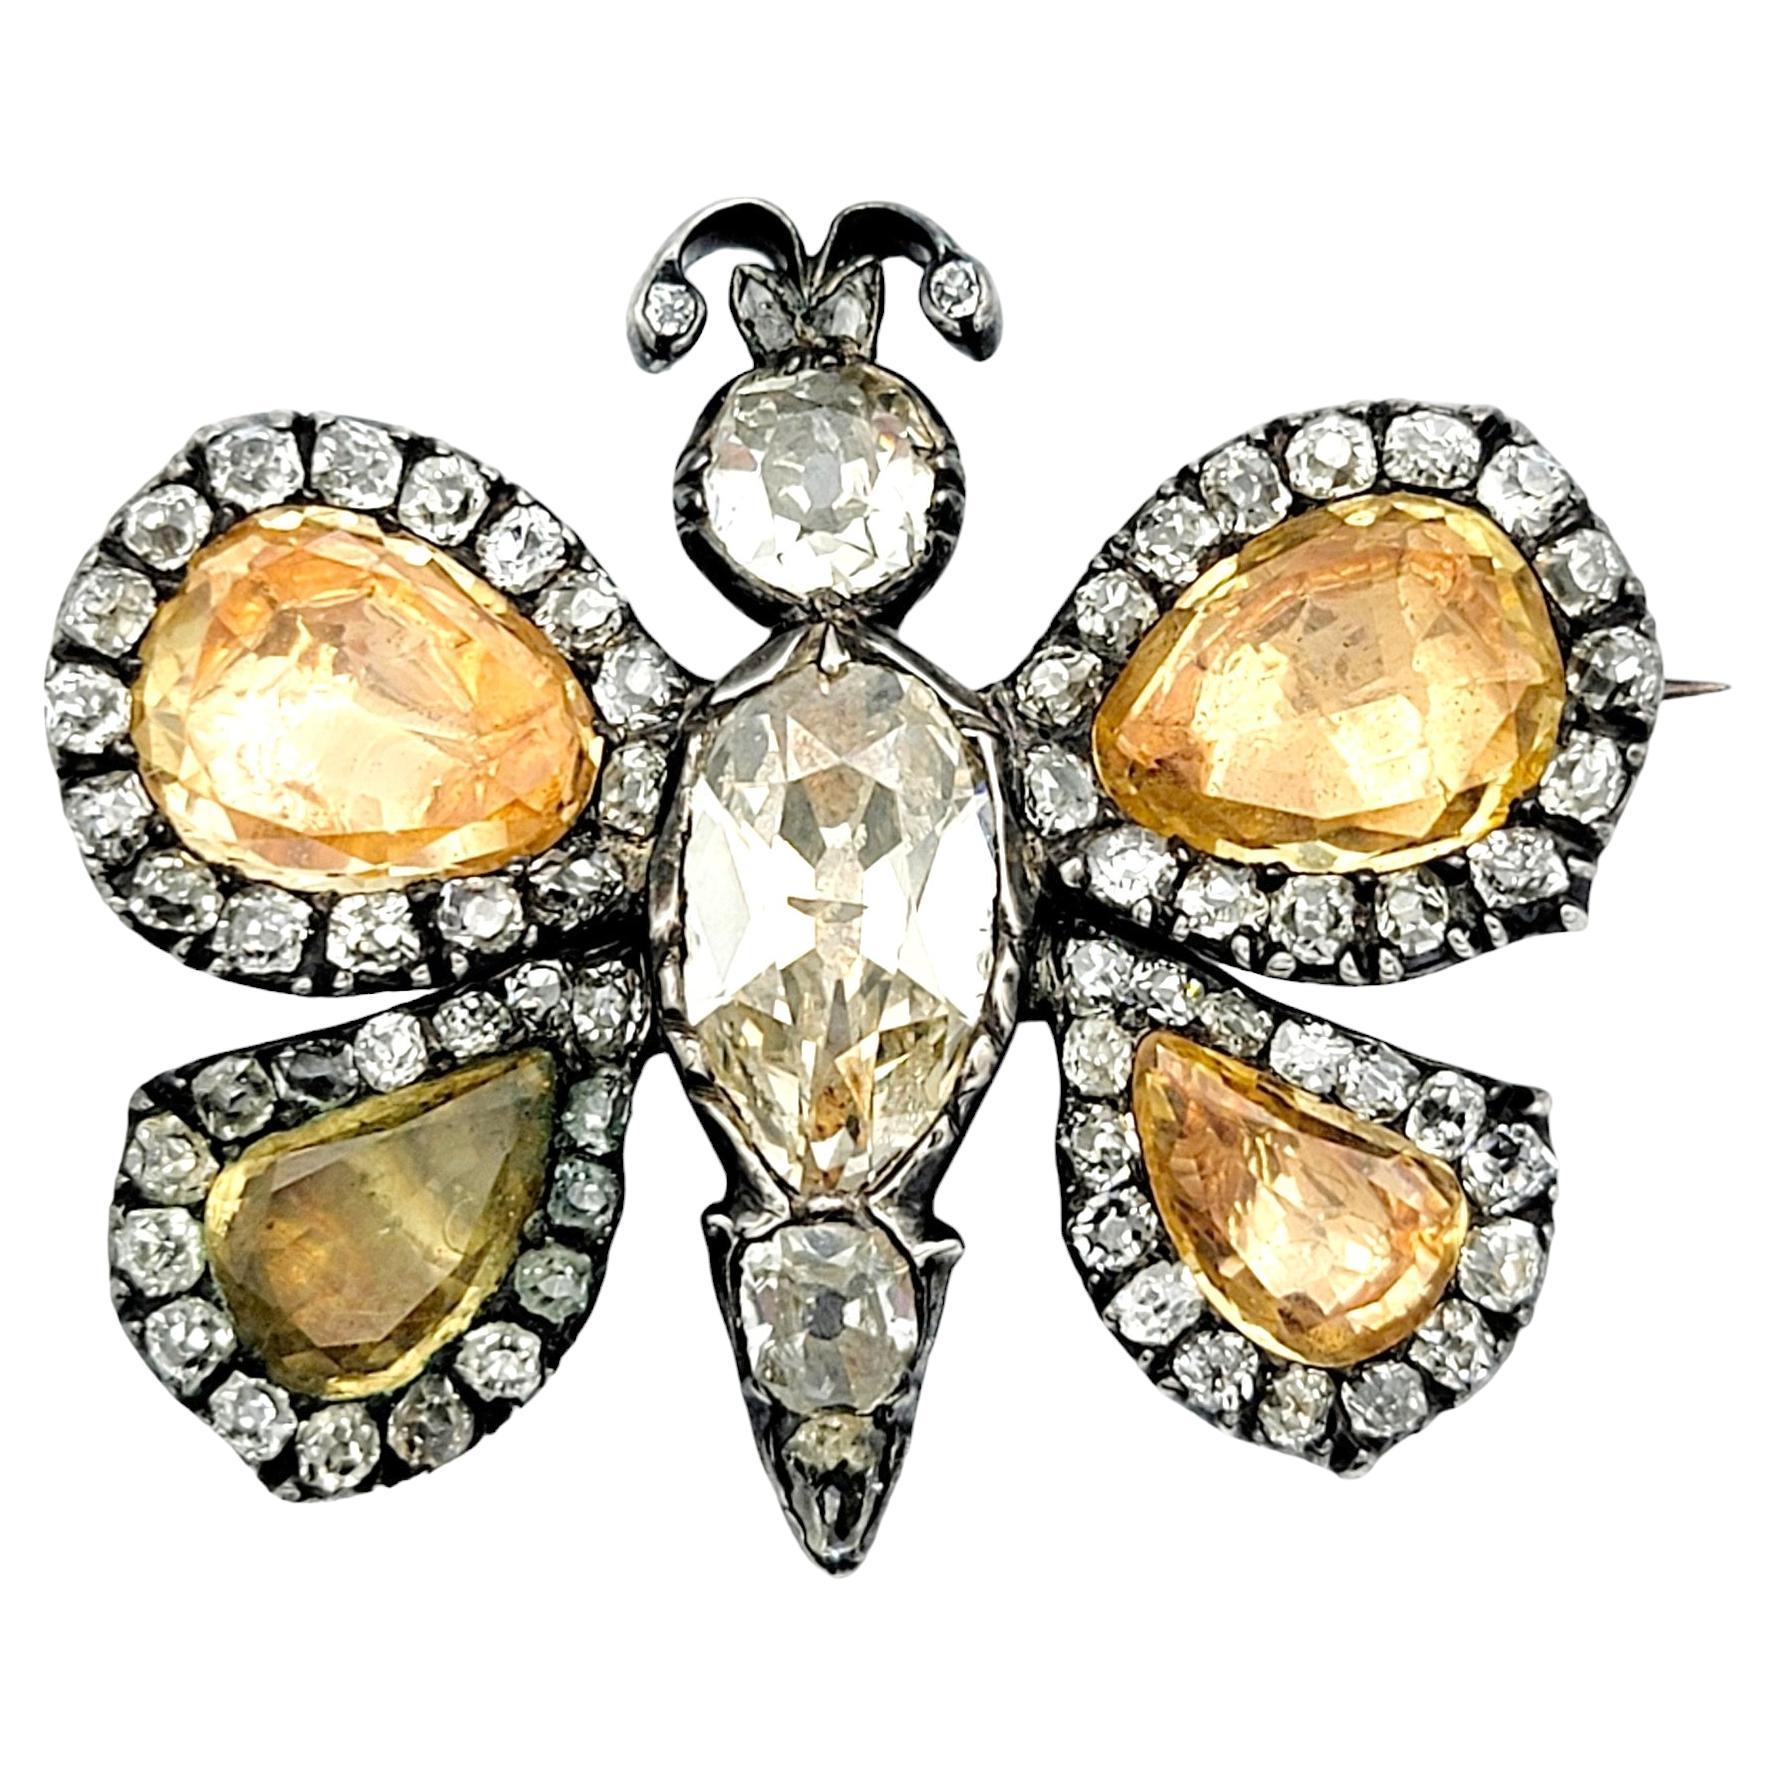 Antique 15.95 Carat Total Diamond and Yellow Topaz Butterfly Pin, Silver & Gold